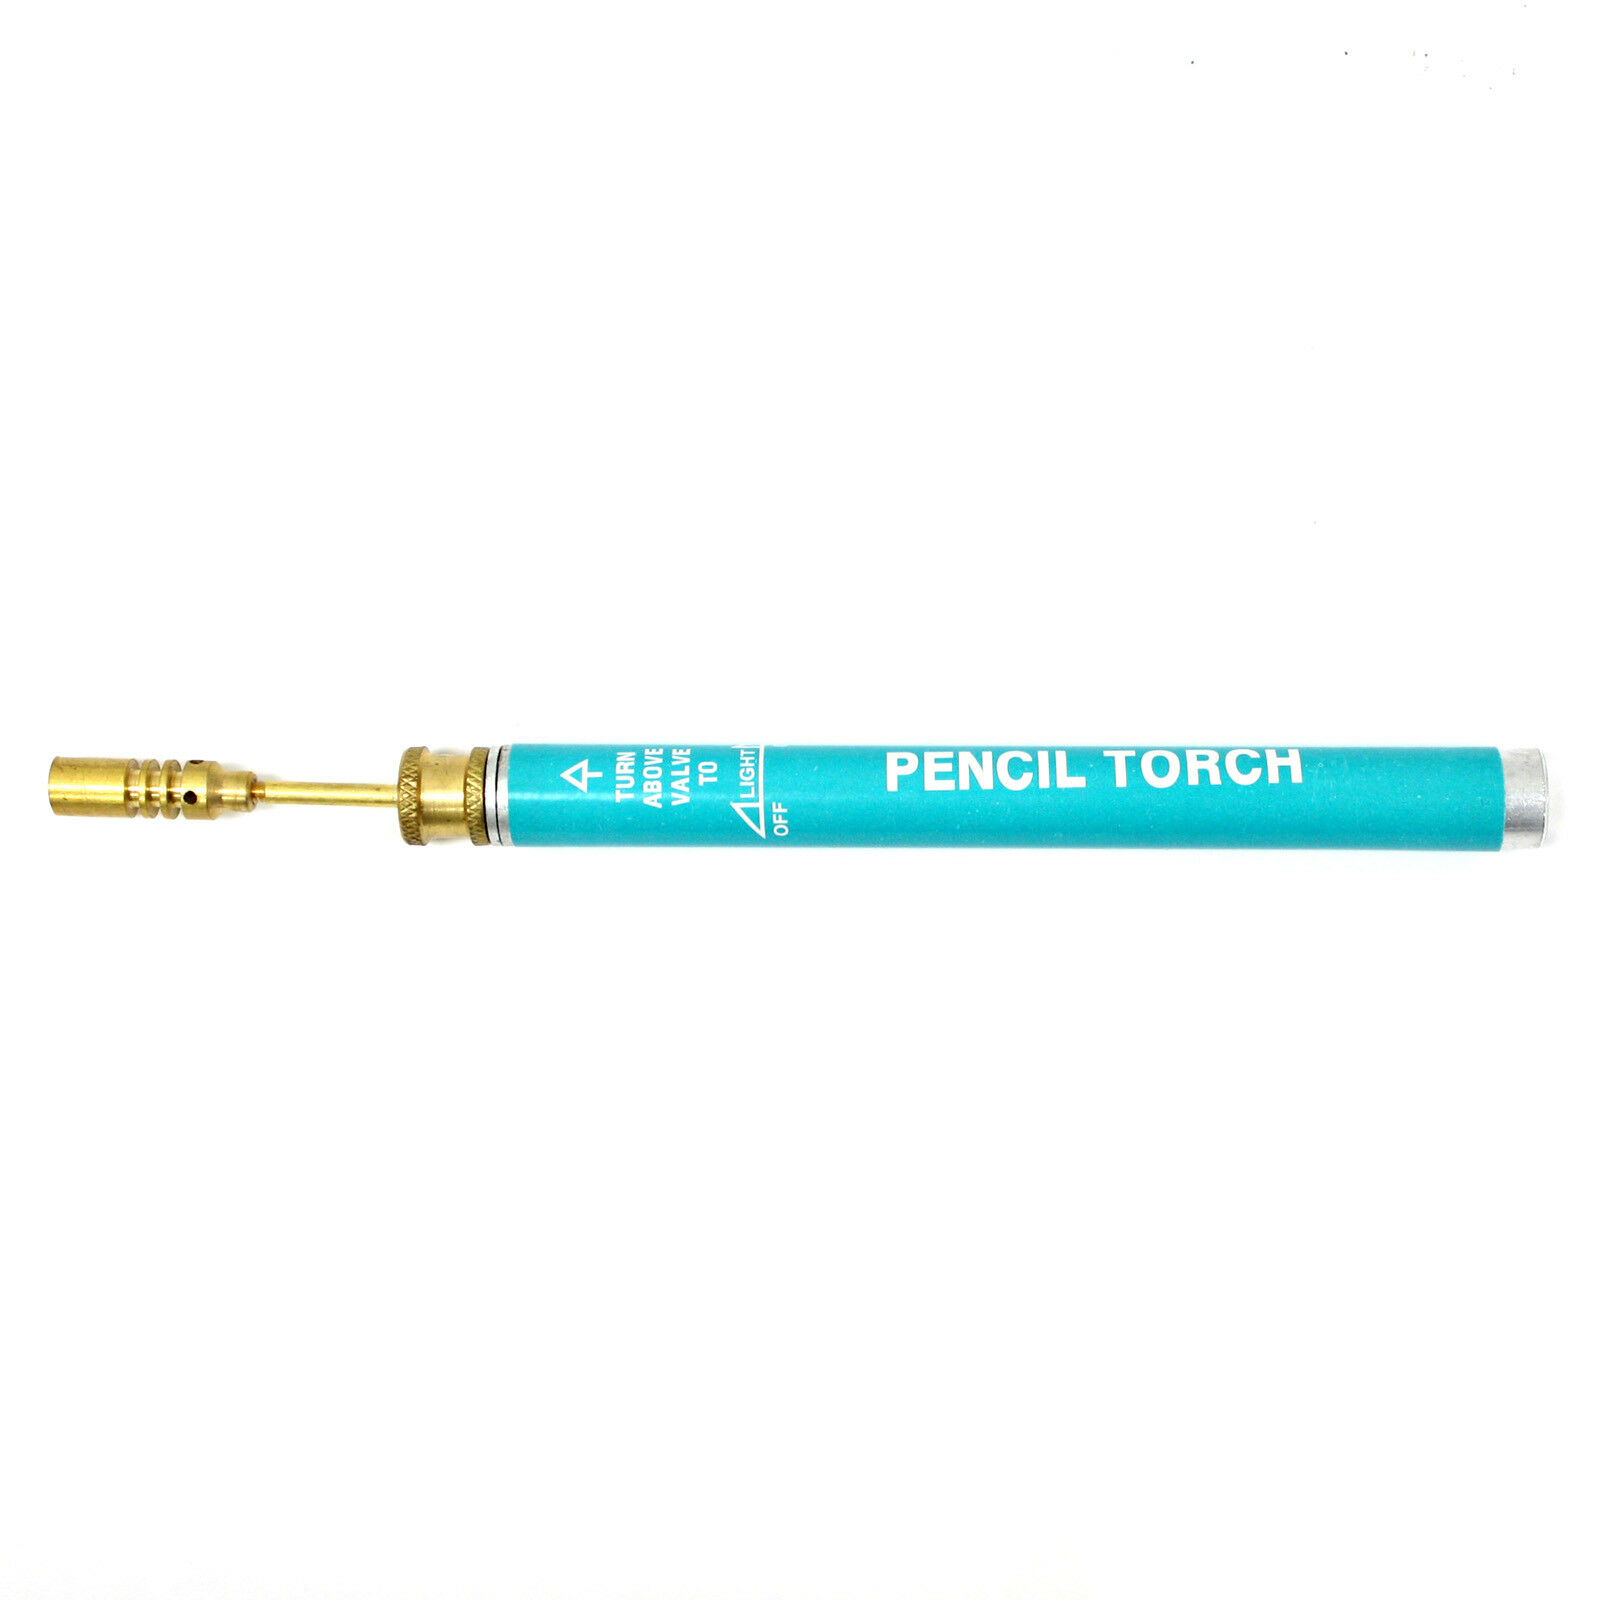 Butane Pencil Torch Refillable Reusable Welding Soldering Jewerly Repair 2pack for sale online 